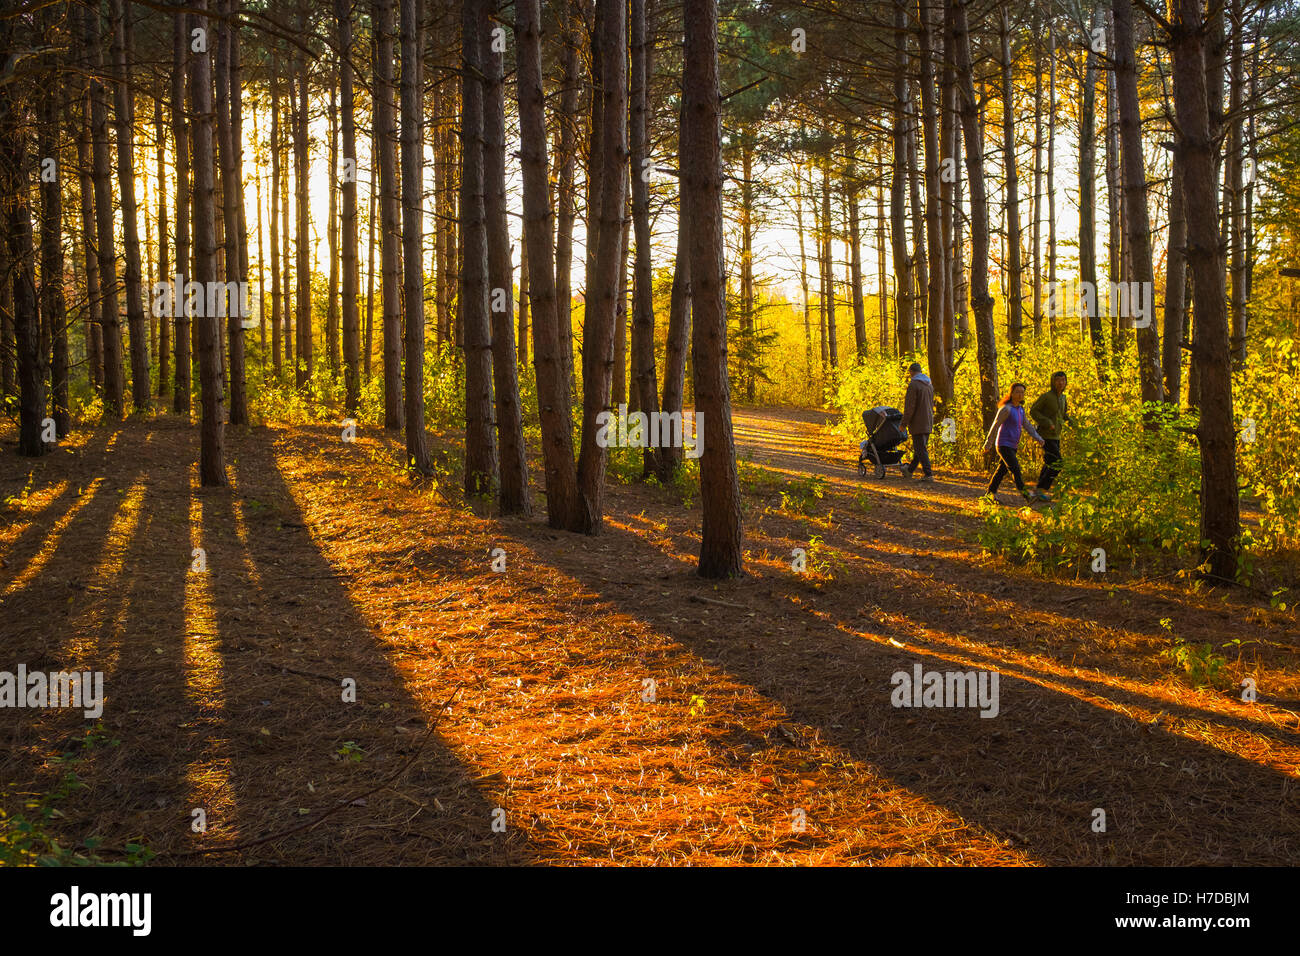 City park with evening light and walkers strolling in red pine forest. Stock Photo